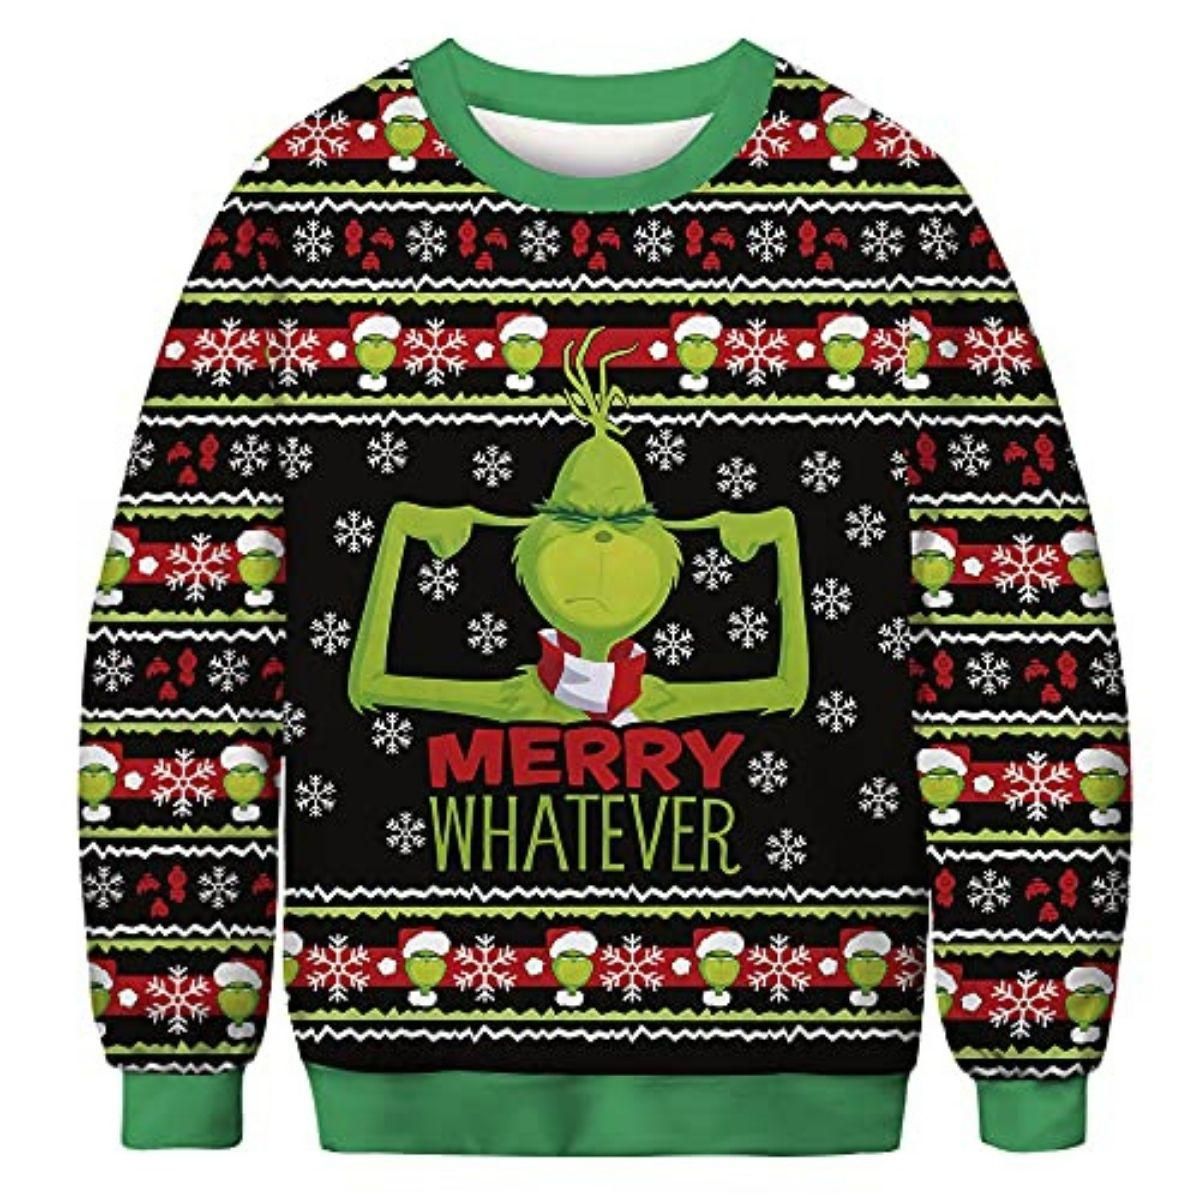 40 Of The Best Ugly Holiday Sweaters